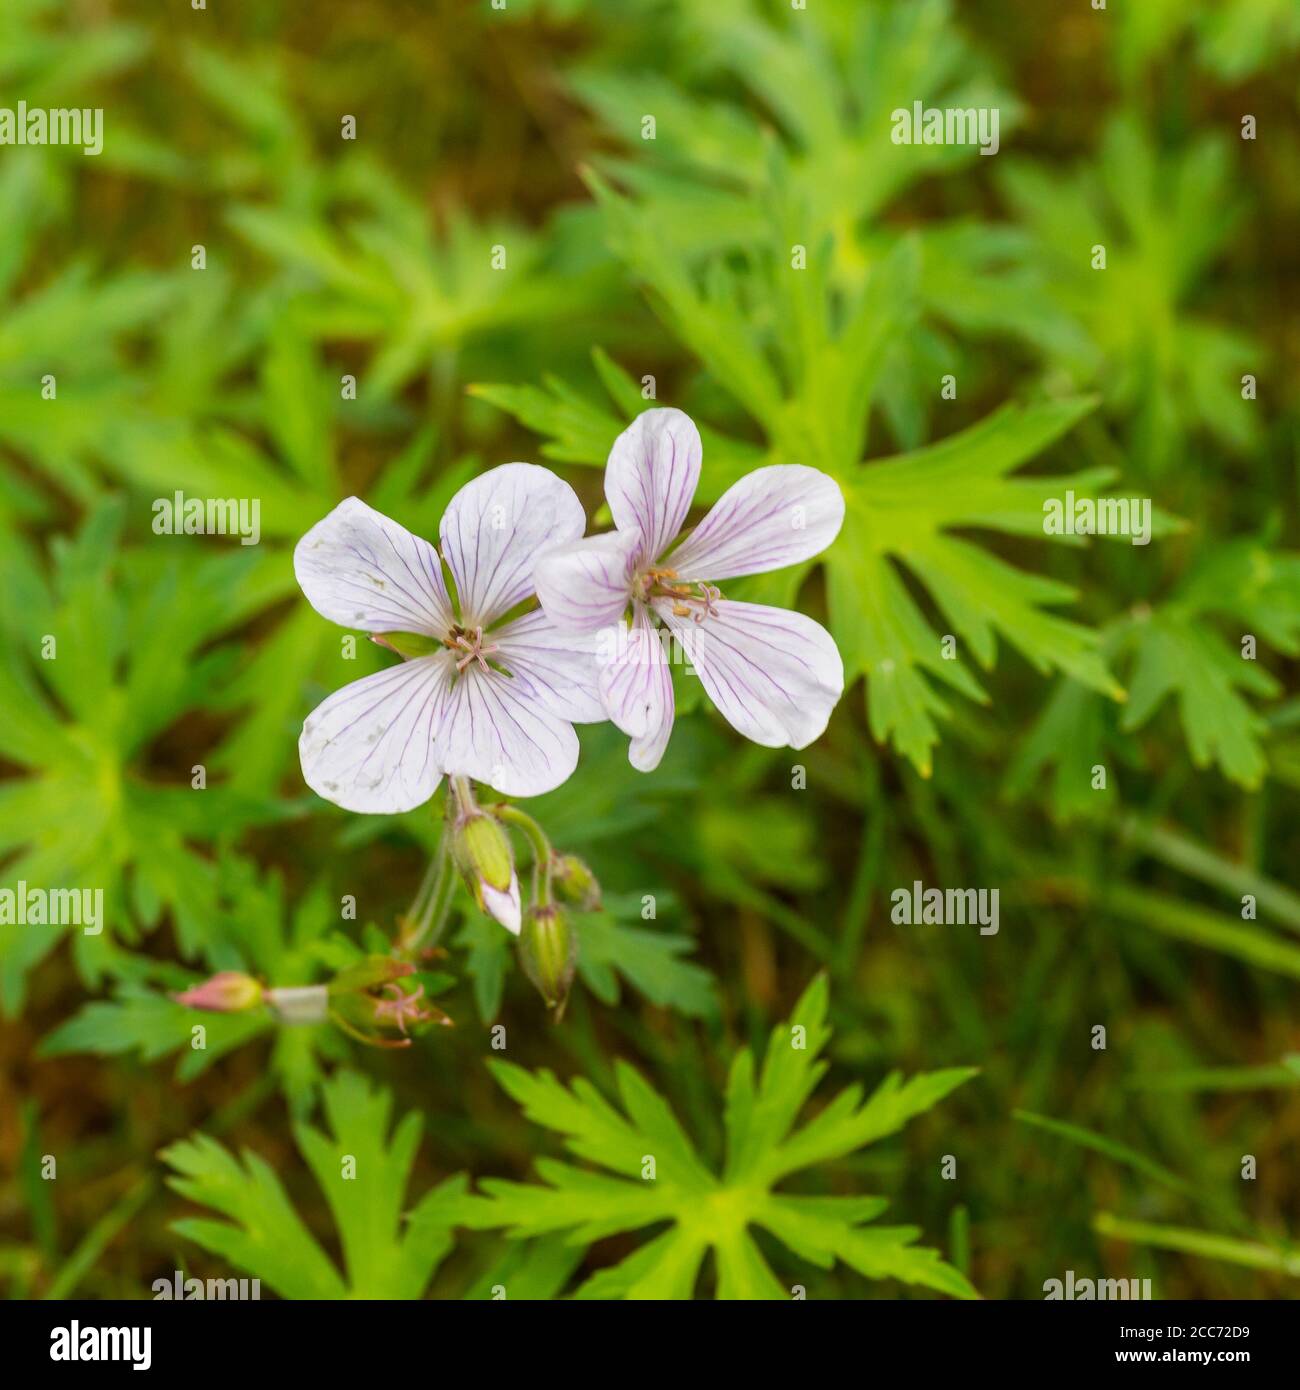 A shot of a pair of white hardy geranium blooms. Stock Photo